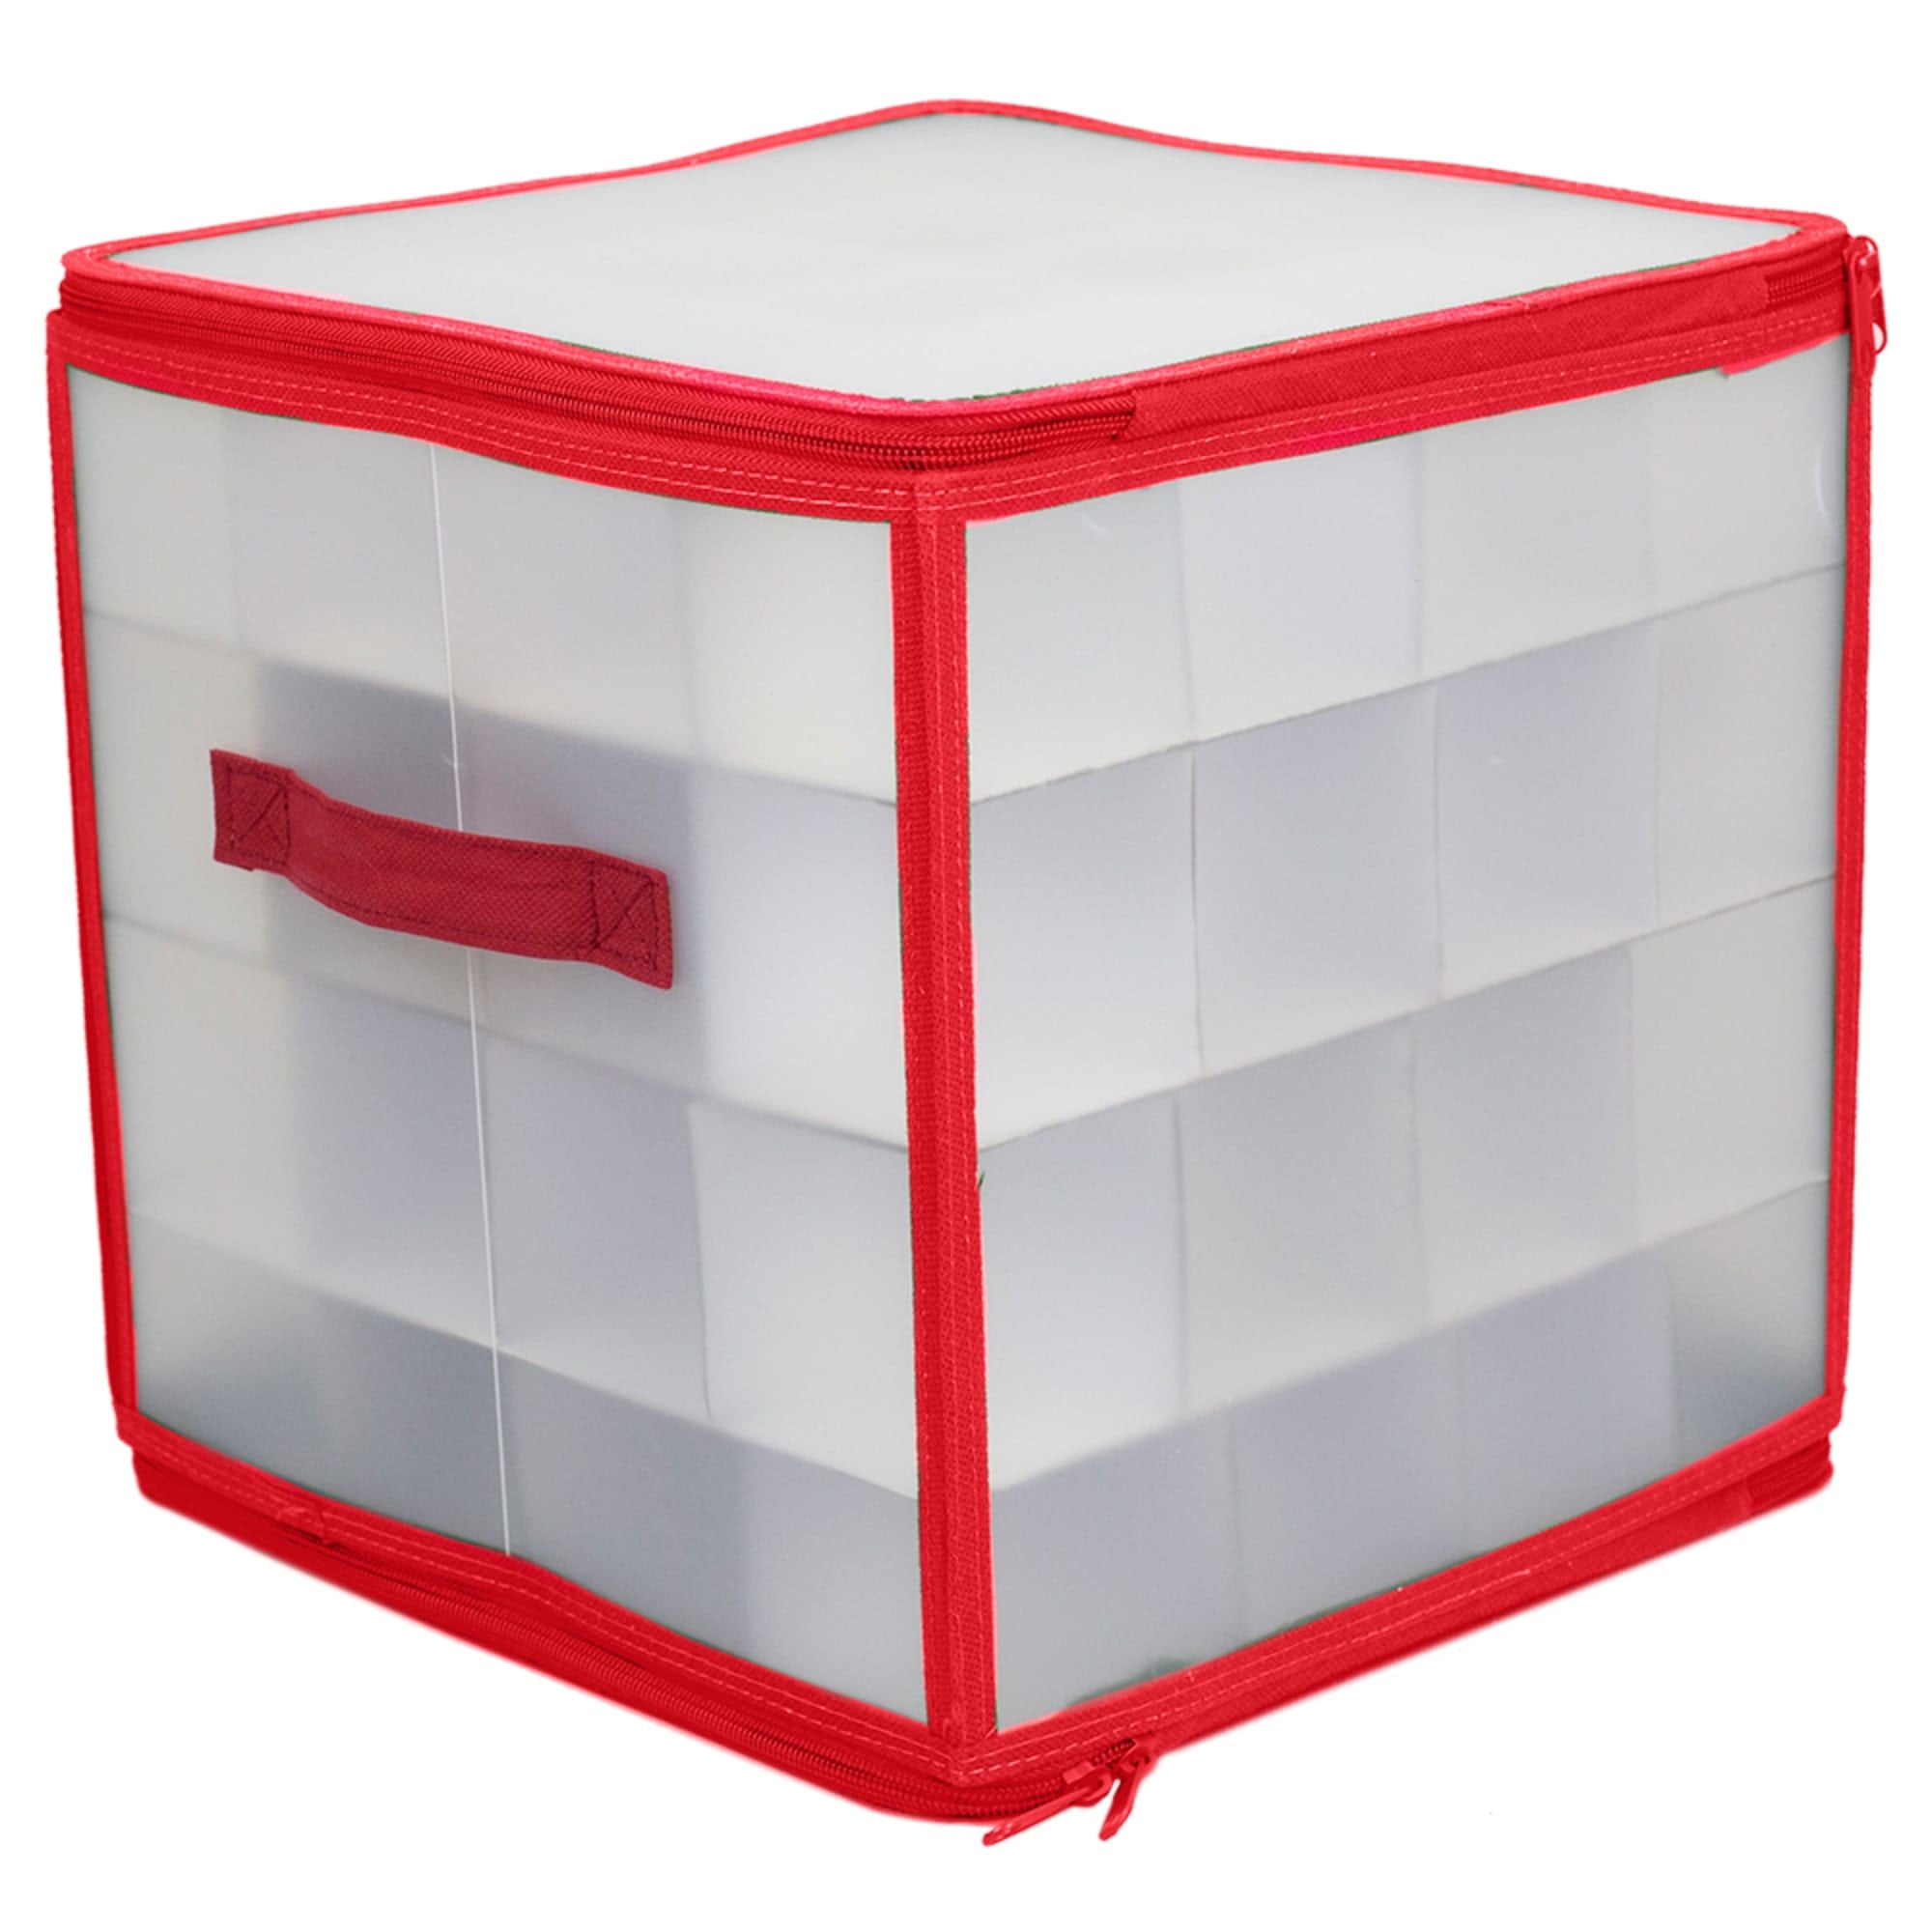 Home Basics Zippered  64 Ornament Storage Box, Red $8.00 EACH, CASE PACK OF 12